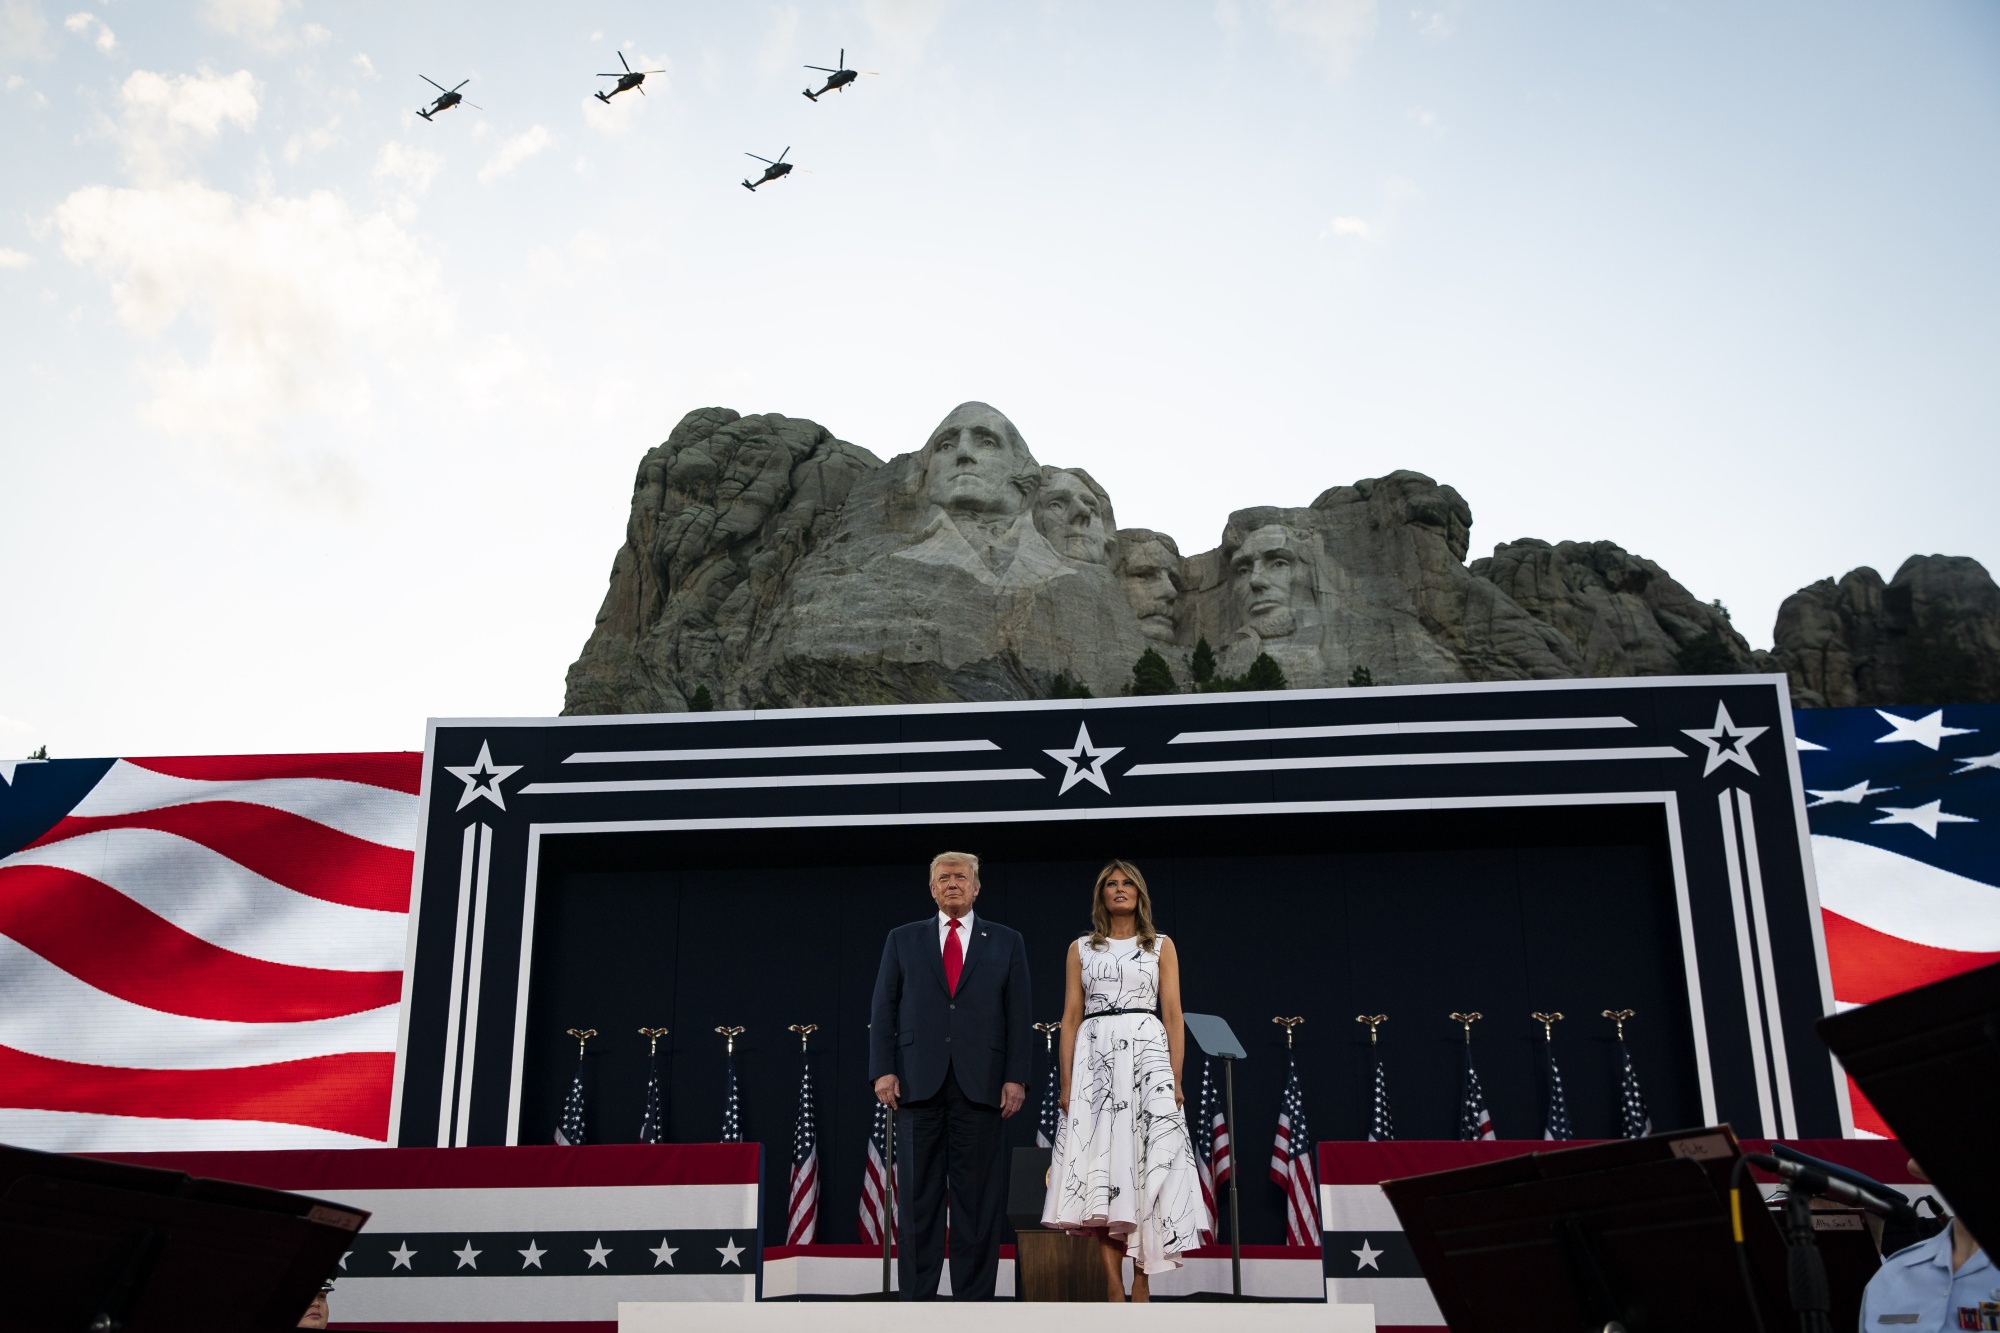 U.S. President Donald Trump and First Lady Melania Trump watch as South Dakota Army National Guard Sikorsky UH-60 Black Hawk helicopters fly over during an event at Mount Rushmore National Memorial in Keystone, U.S., July 3.&nbsp;